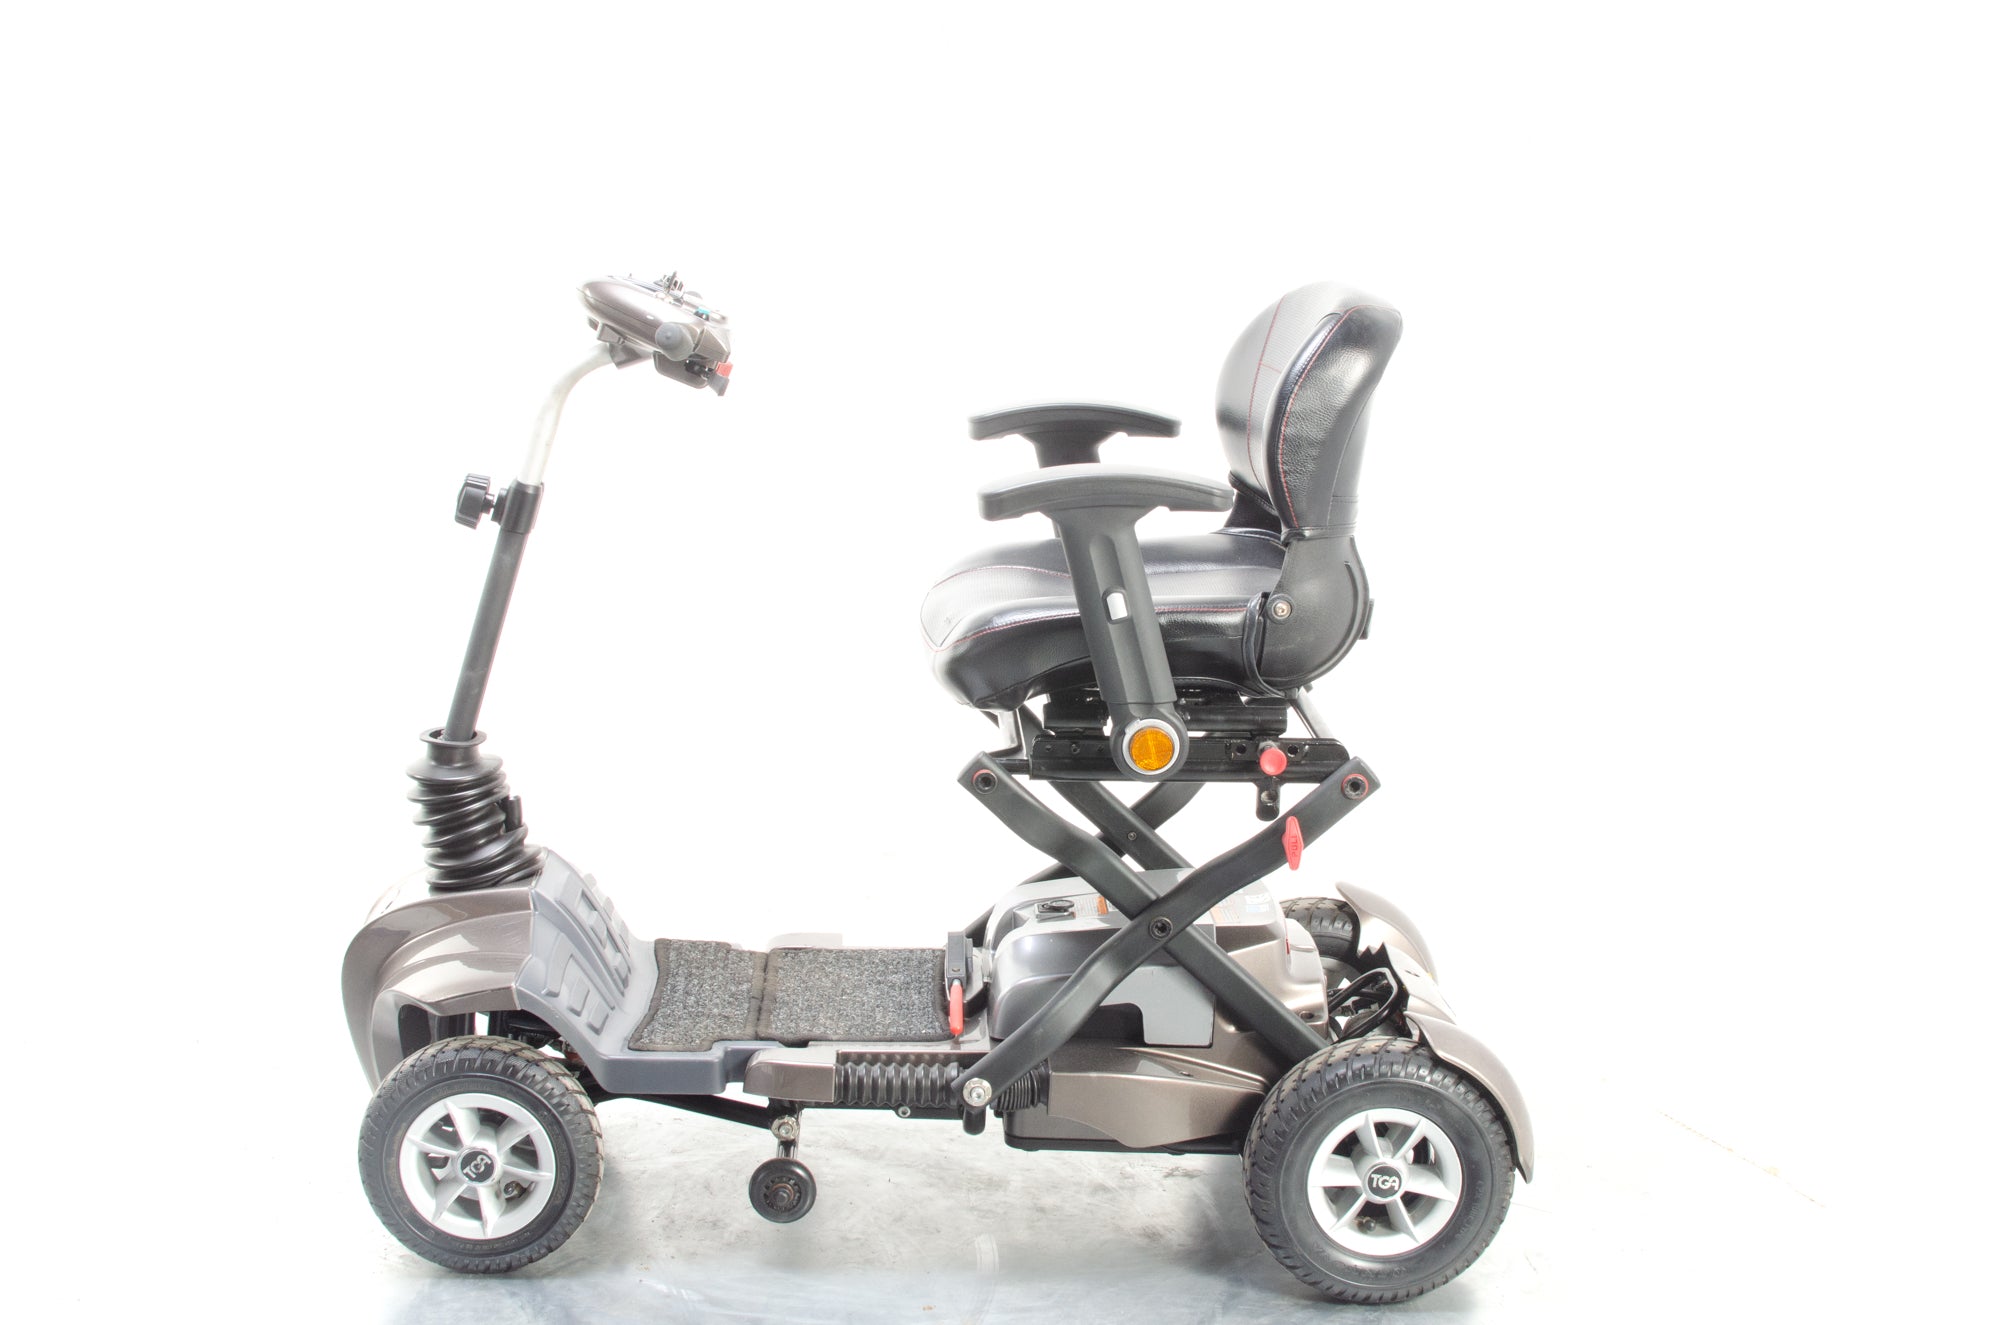 TGA Maximo Folding Electric Mobility Scooter 4mph Lithium Pneumatic Suspension